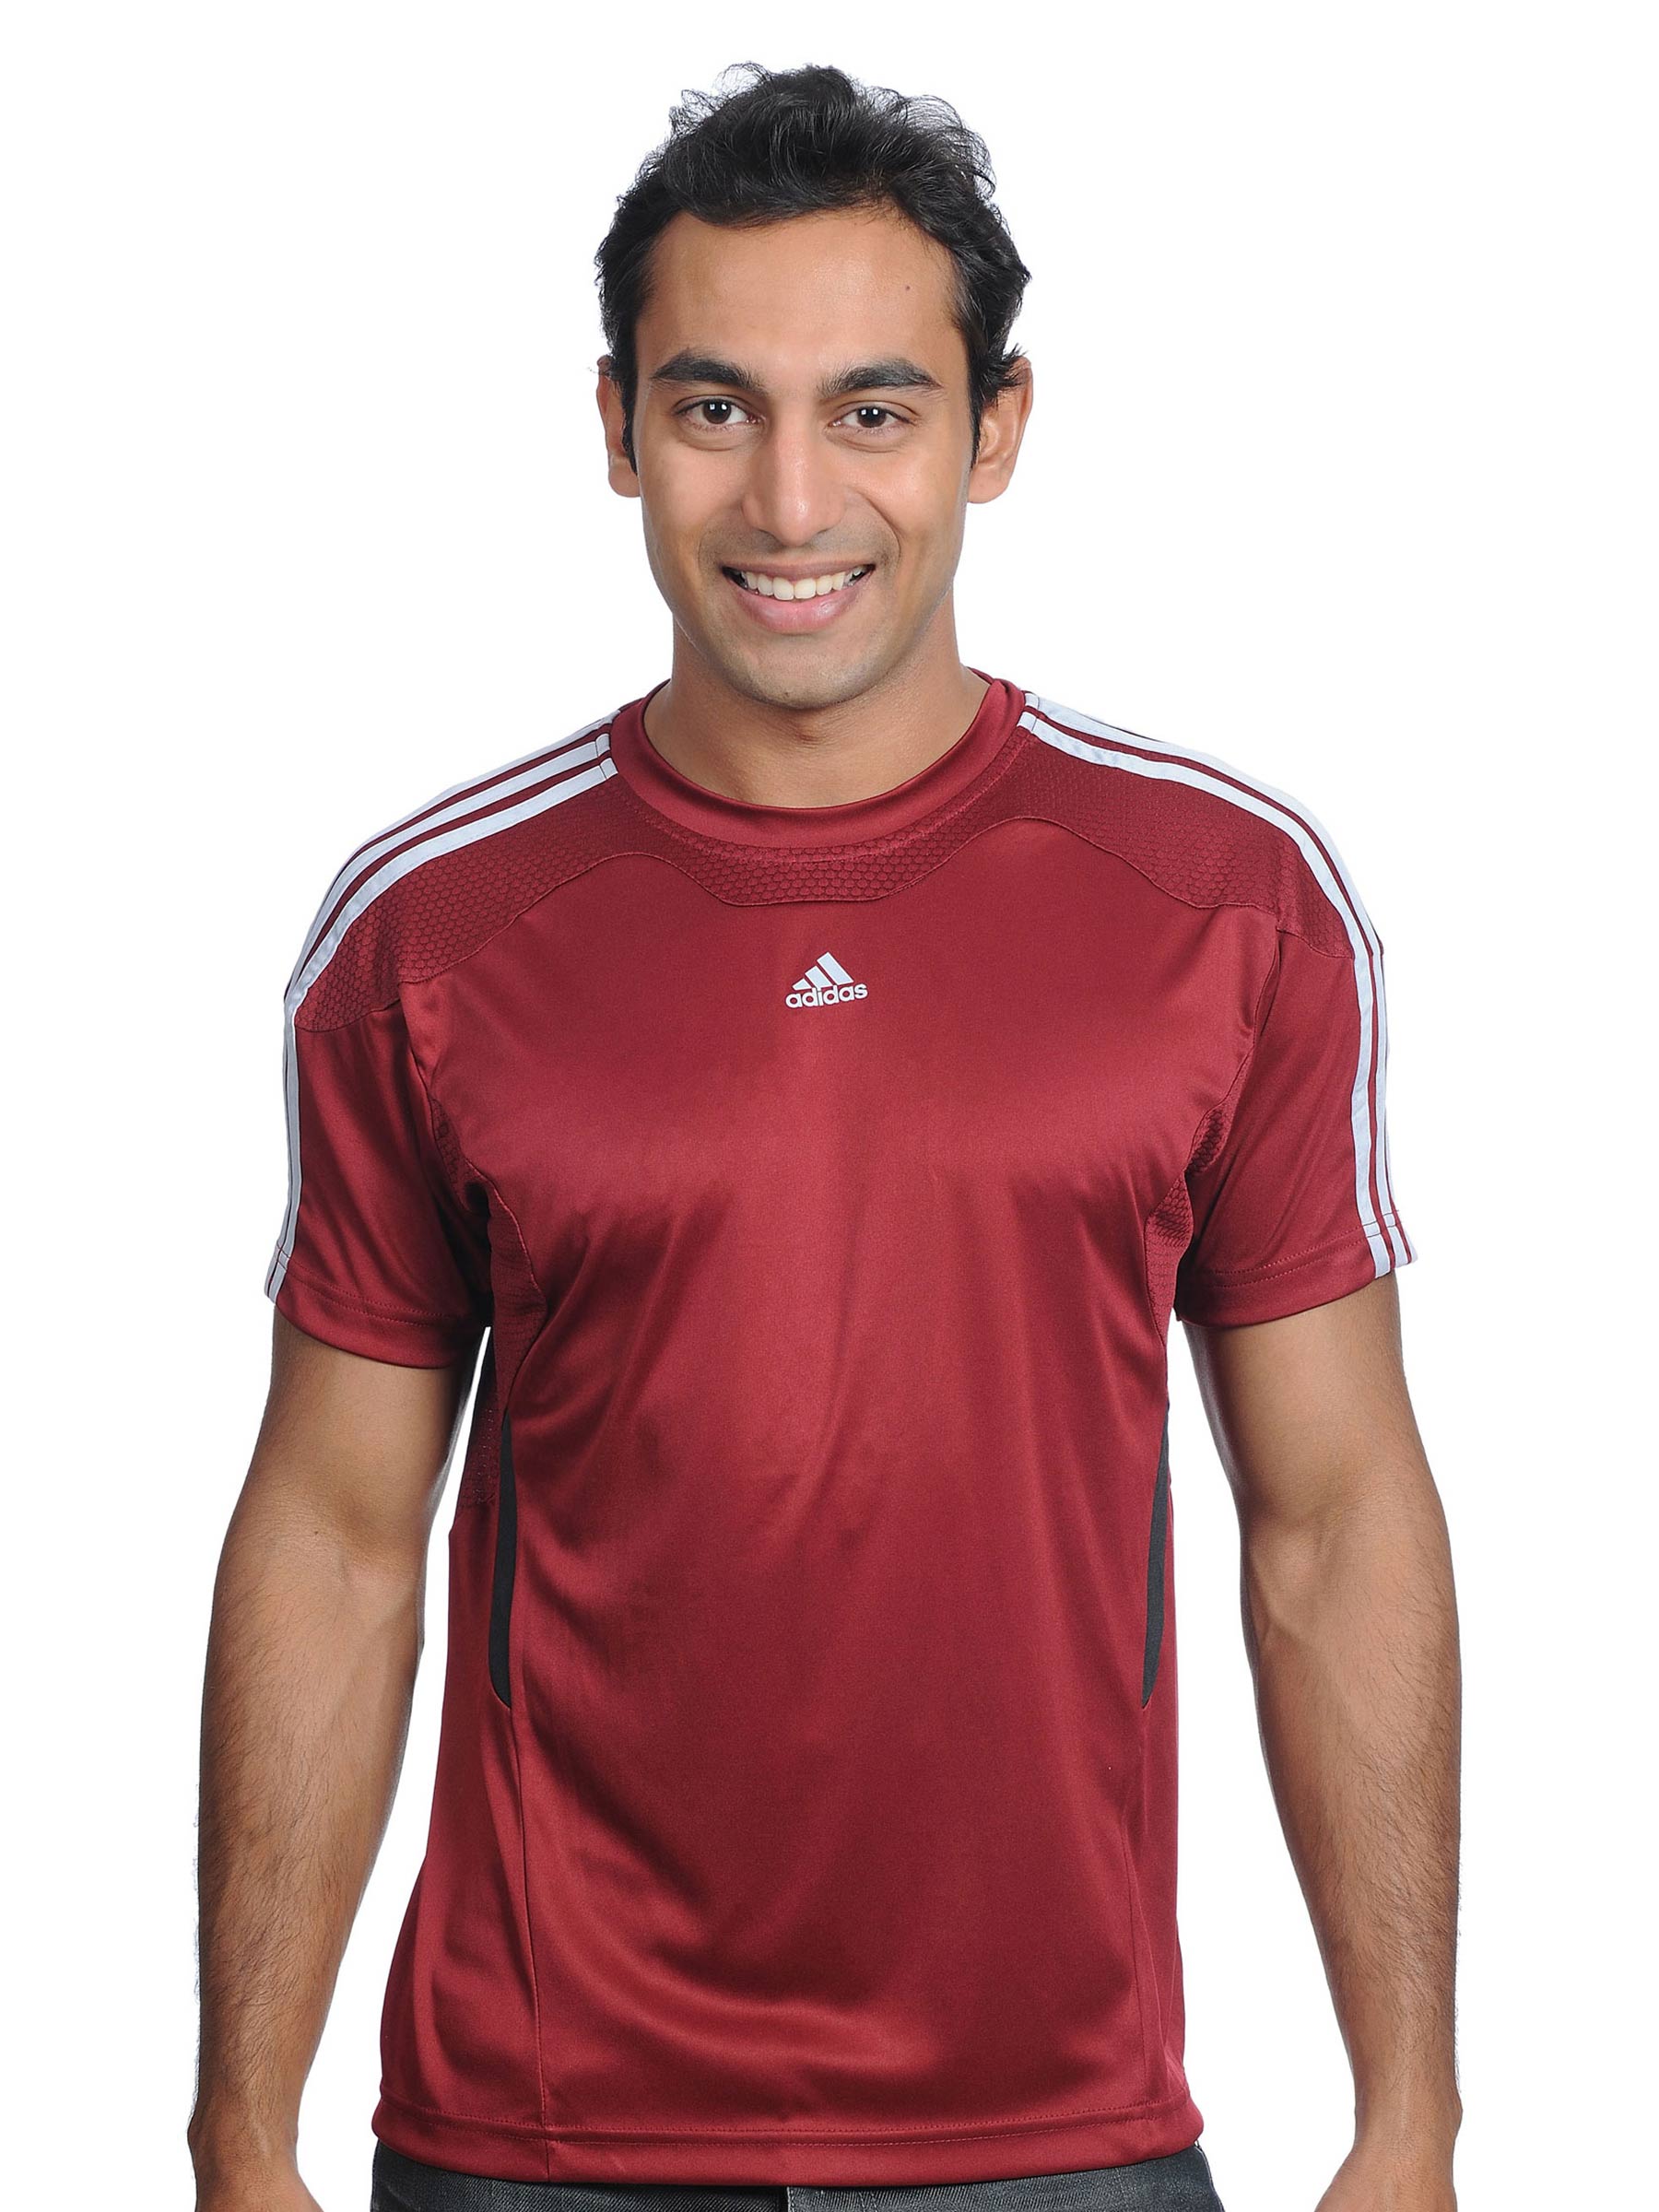 ADIDAS Mens Fitted Red T-shirt